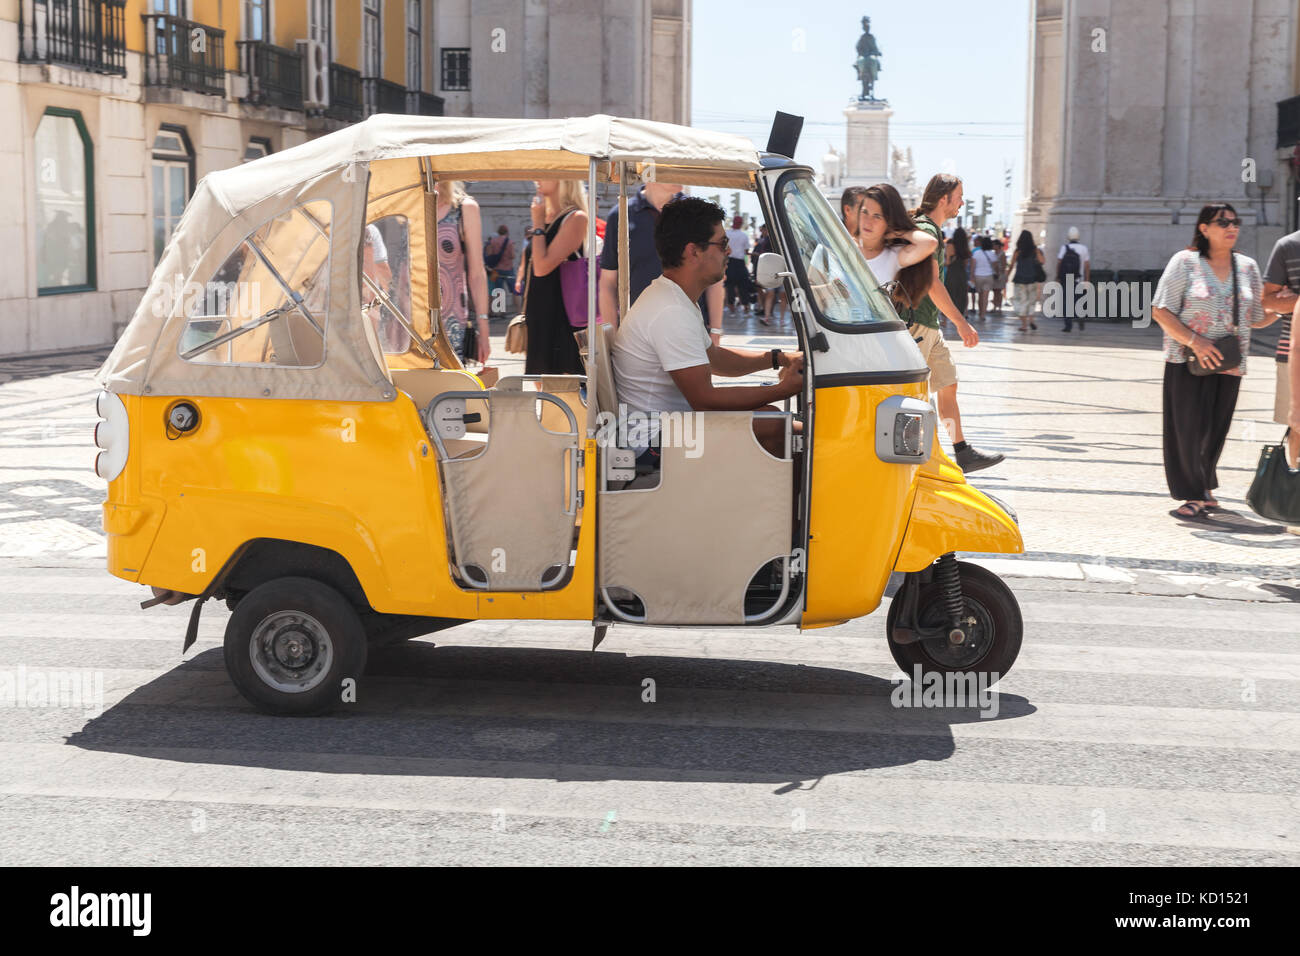 Lisbon, Portugal - August 12, 2017: Yellow Tuk Tuk taxi cab with driver rides the street of Lisbon Stock Photo